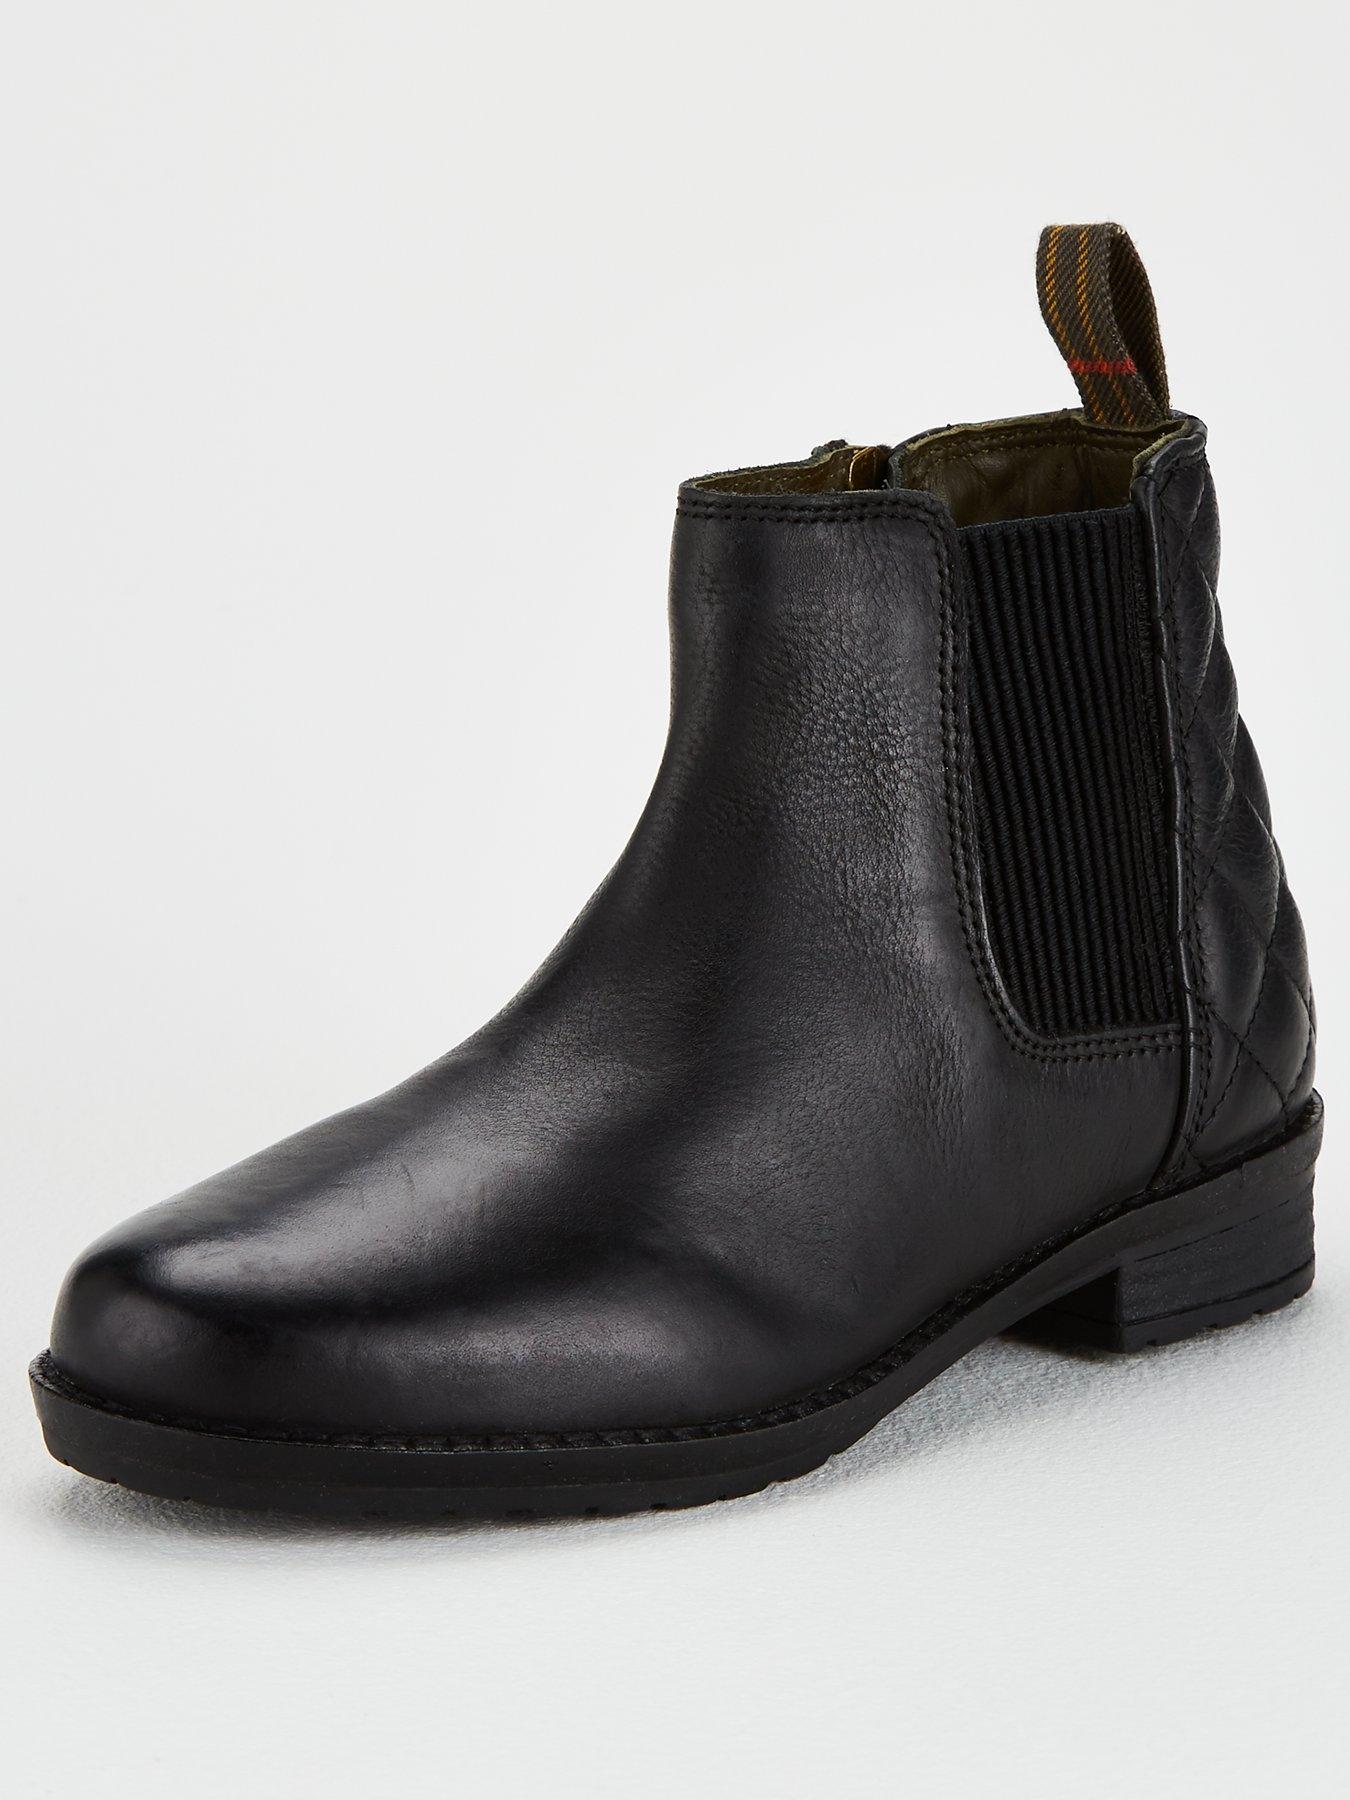 girls chelsea boots sale